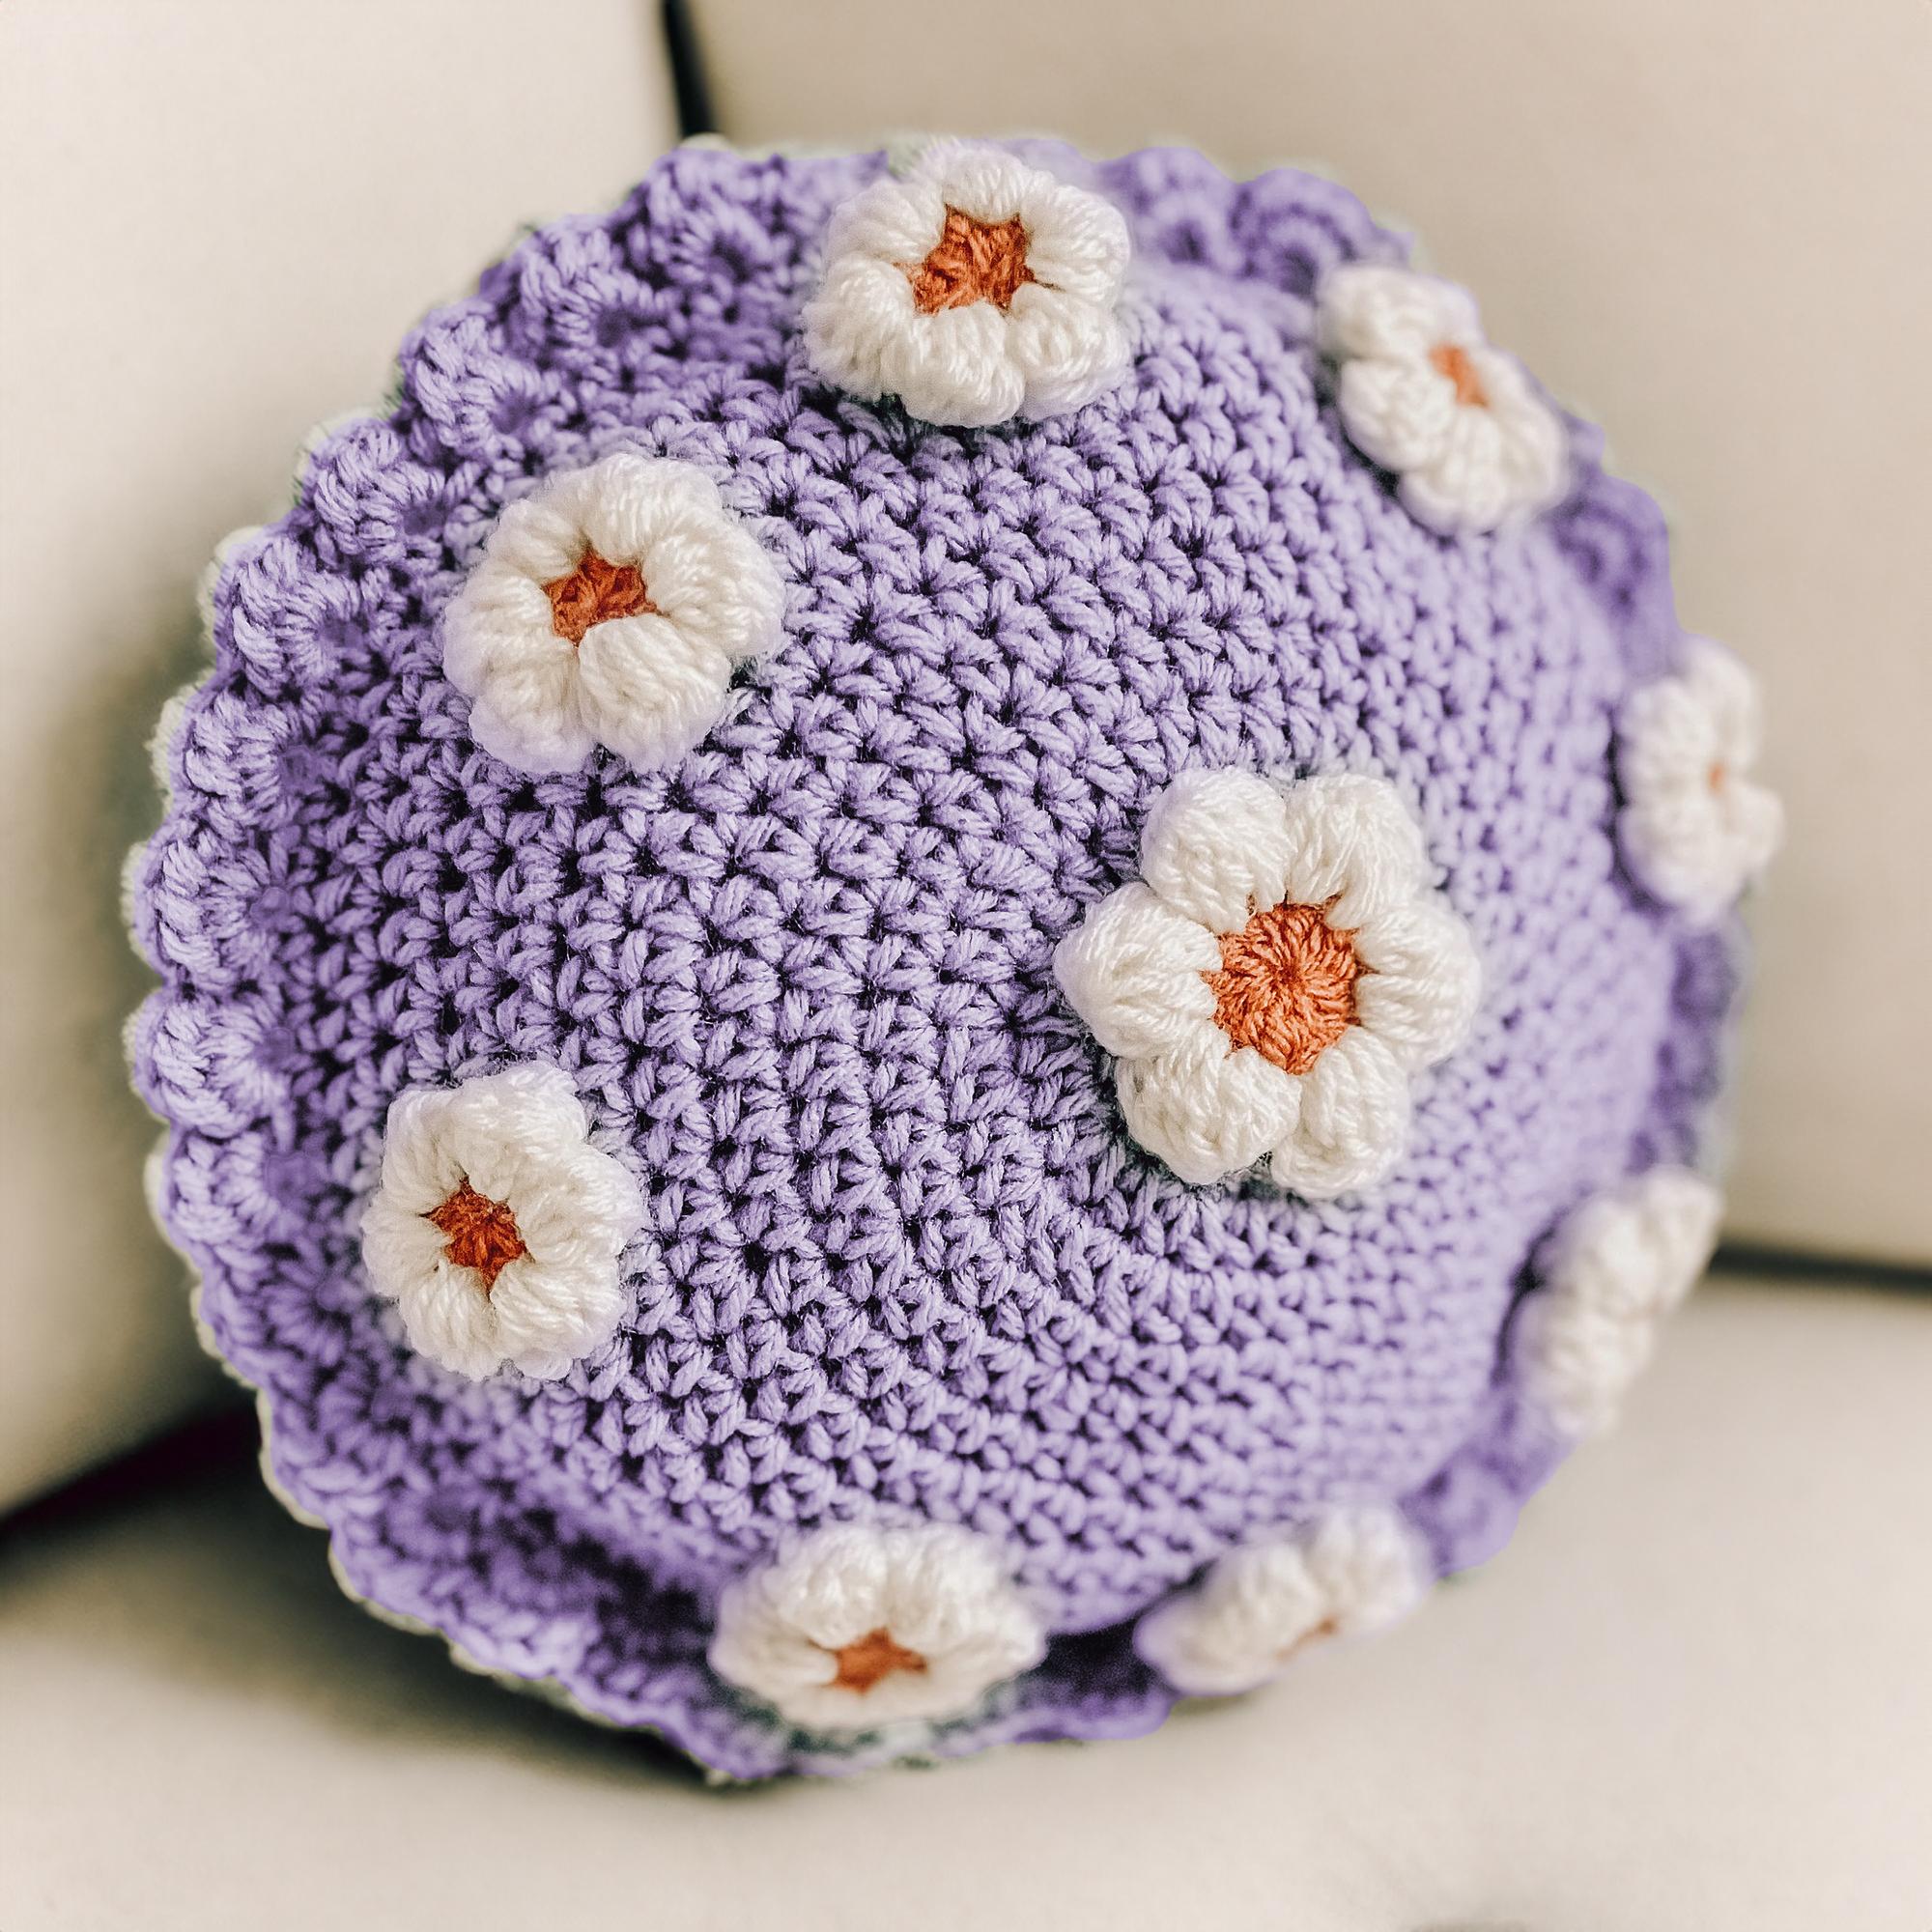 Blooming Pom-Pom Pillow Cover